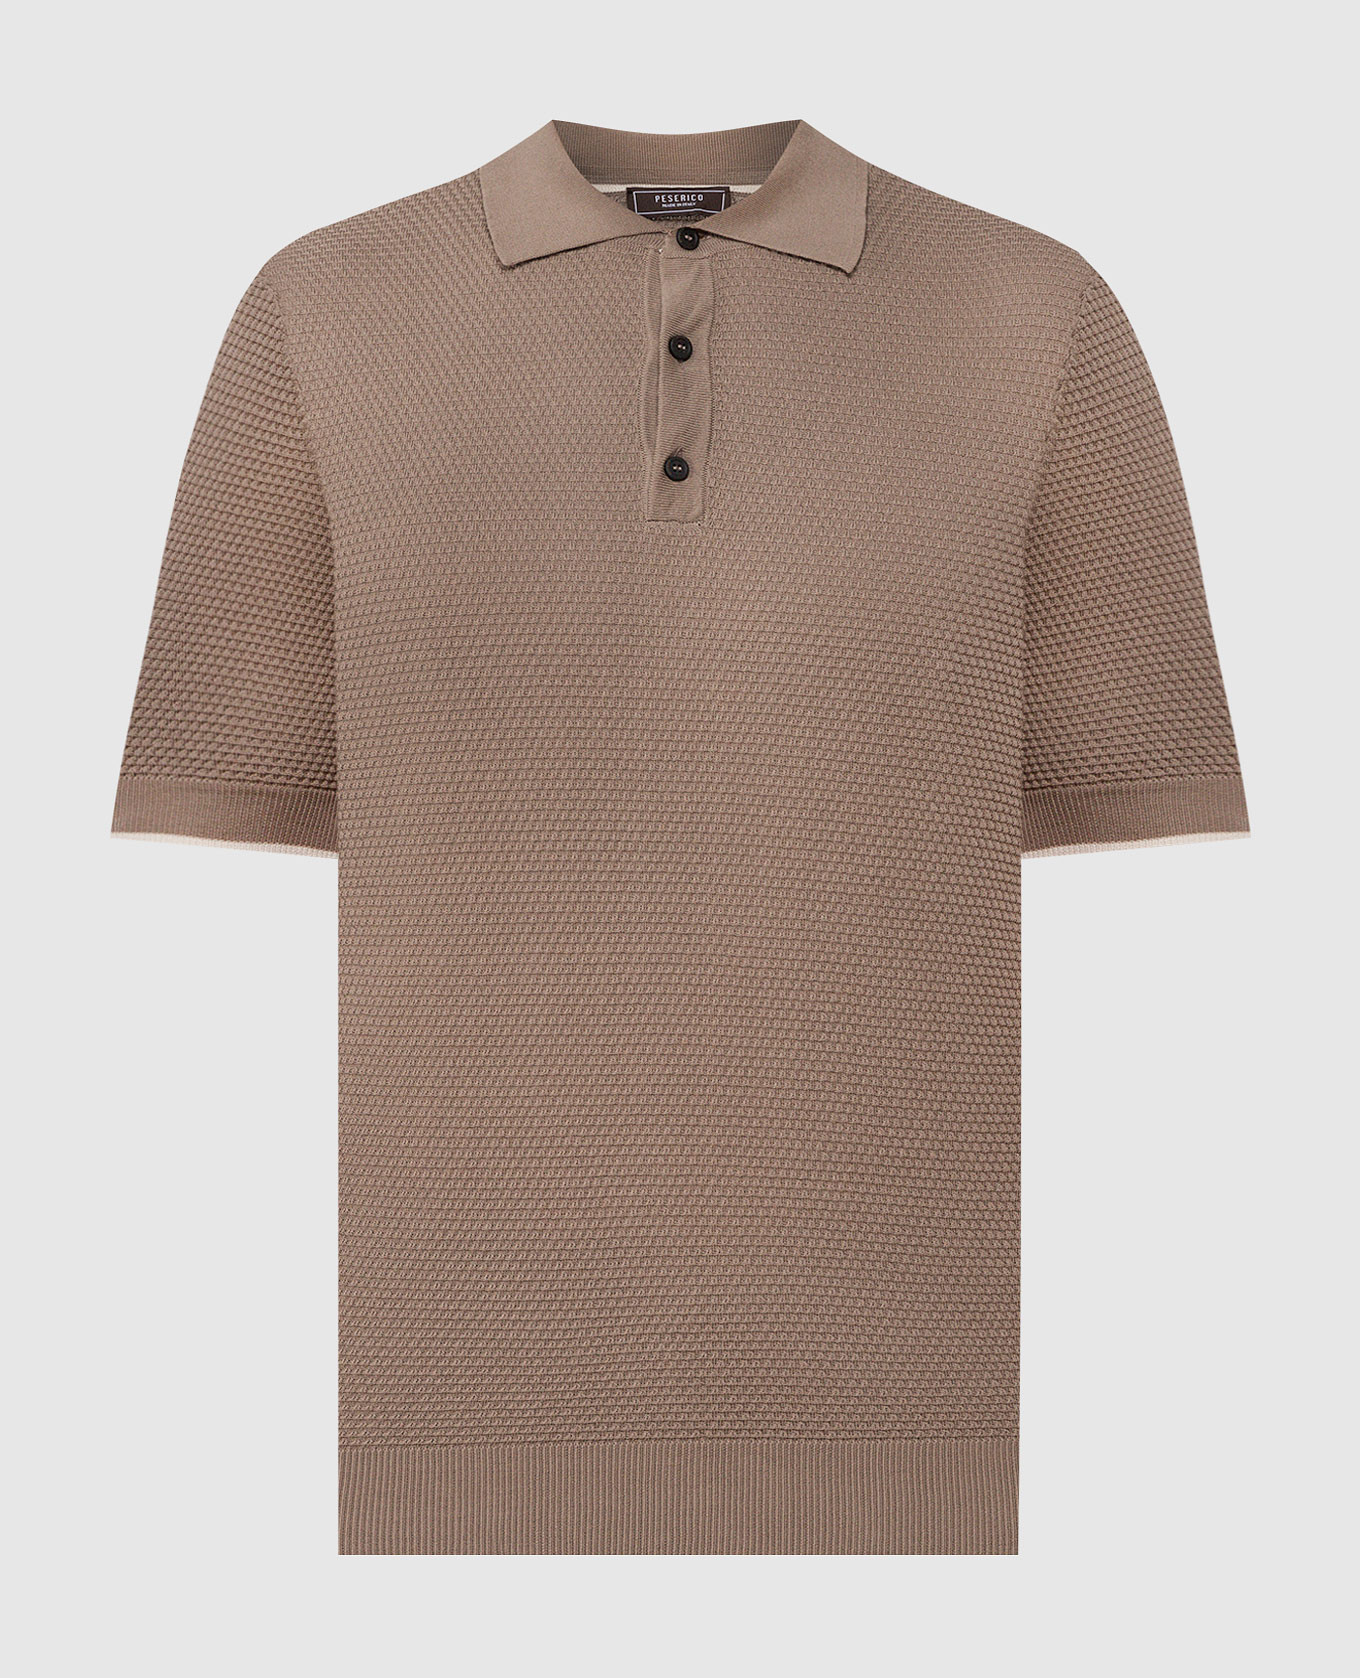 Brown polo shirt with textured pattern